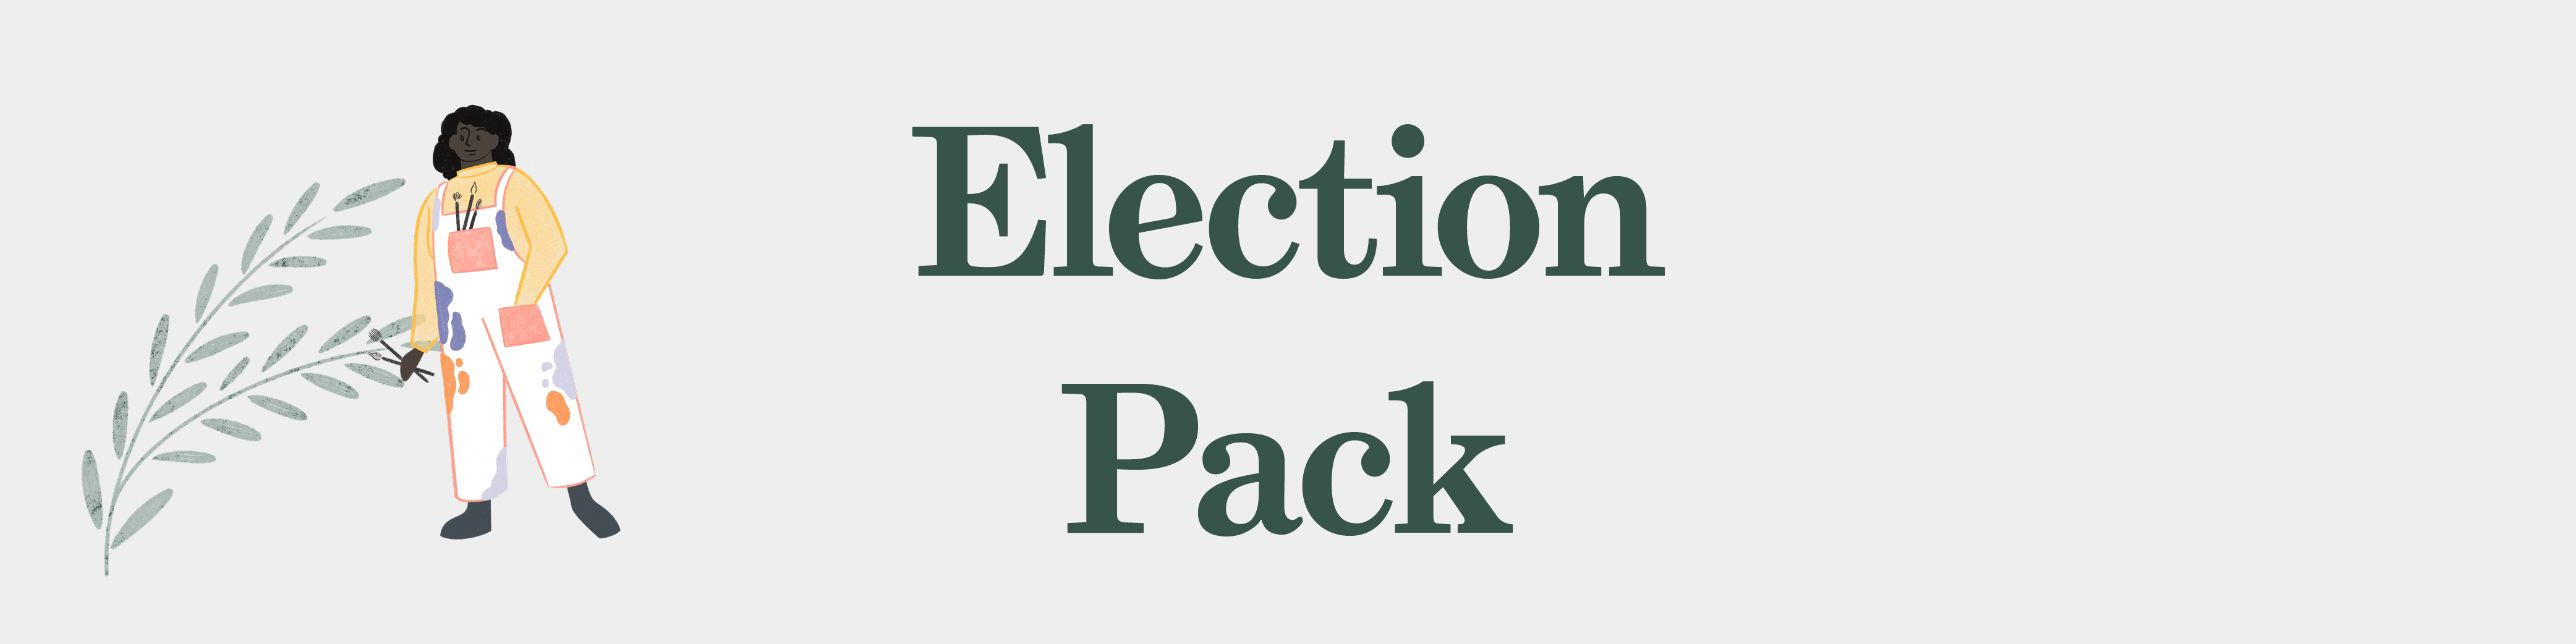 Download the Election Pack PDF